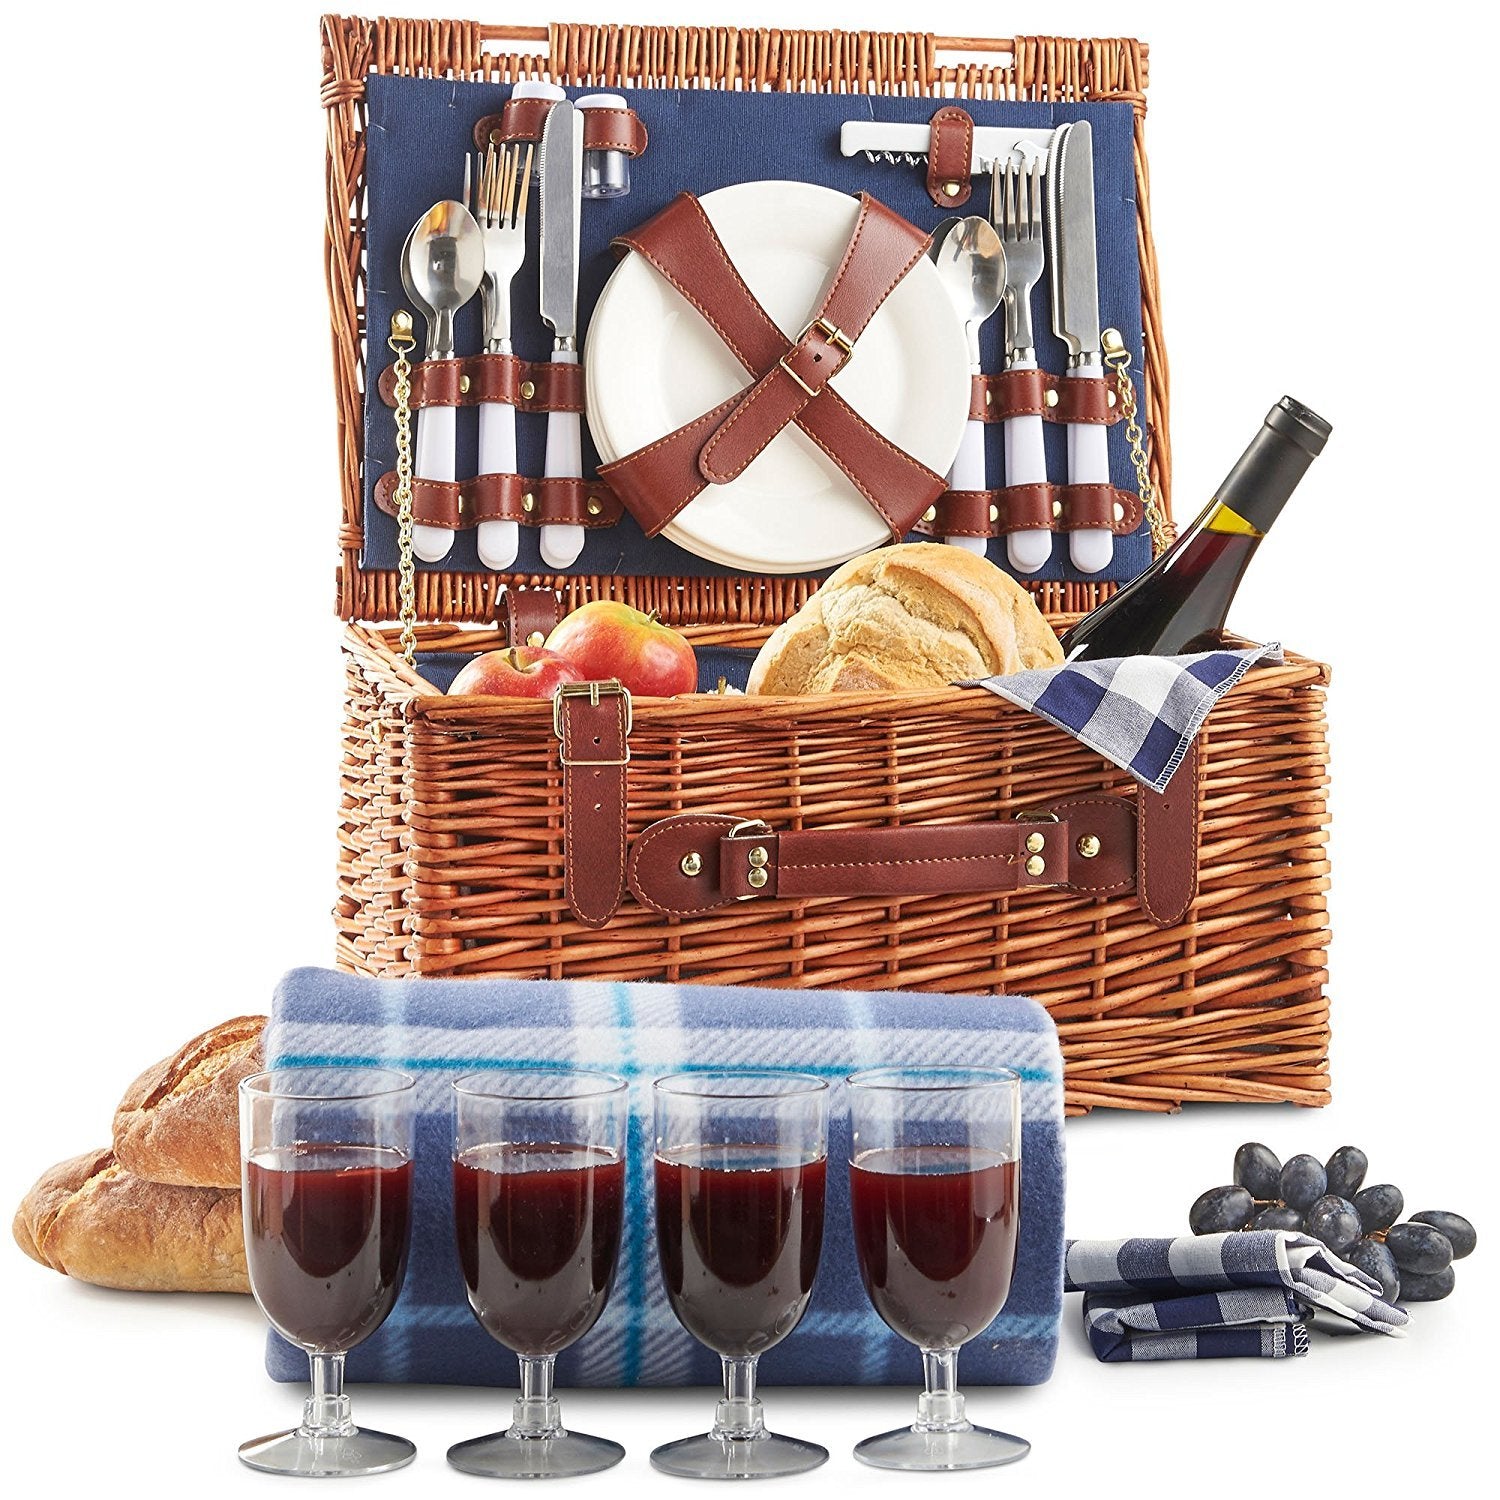 VonShef 4 Person Picnic Baskets - Luxury Wicker Picnic Basket Sets - Stainless Steel Cutlery, Plates, Salt & Pepper Shakers, Wine Glasses, Bottle Opener, Cotton Napkins (4 Person, Navy)